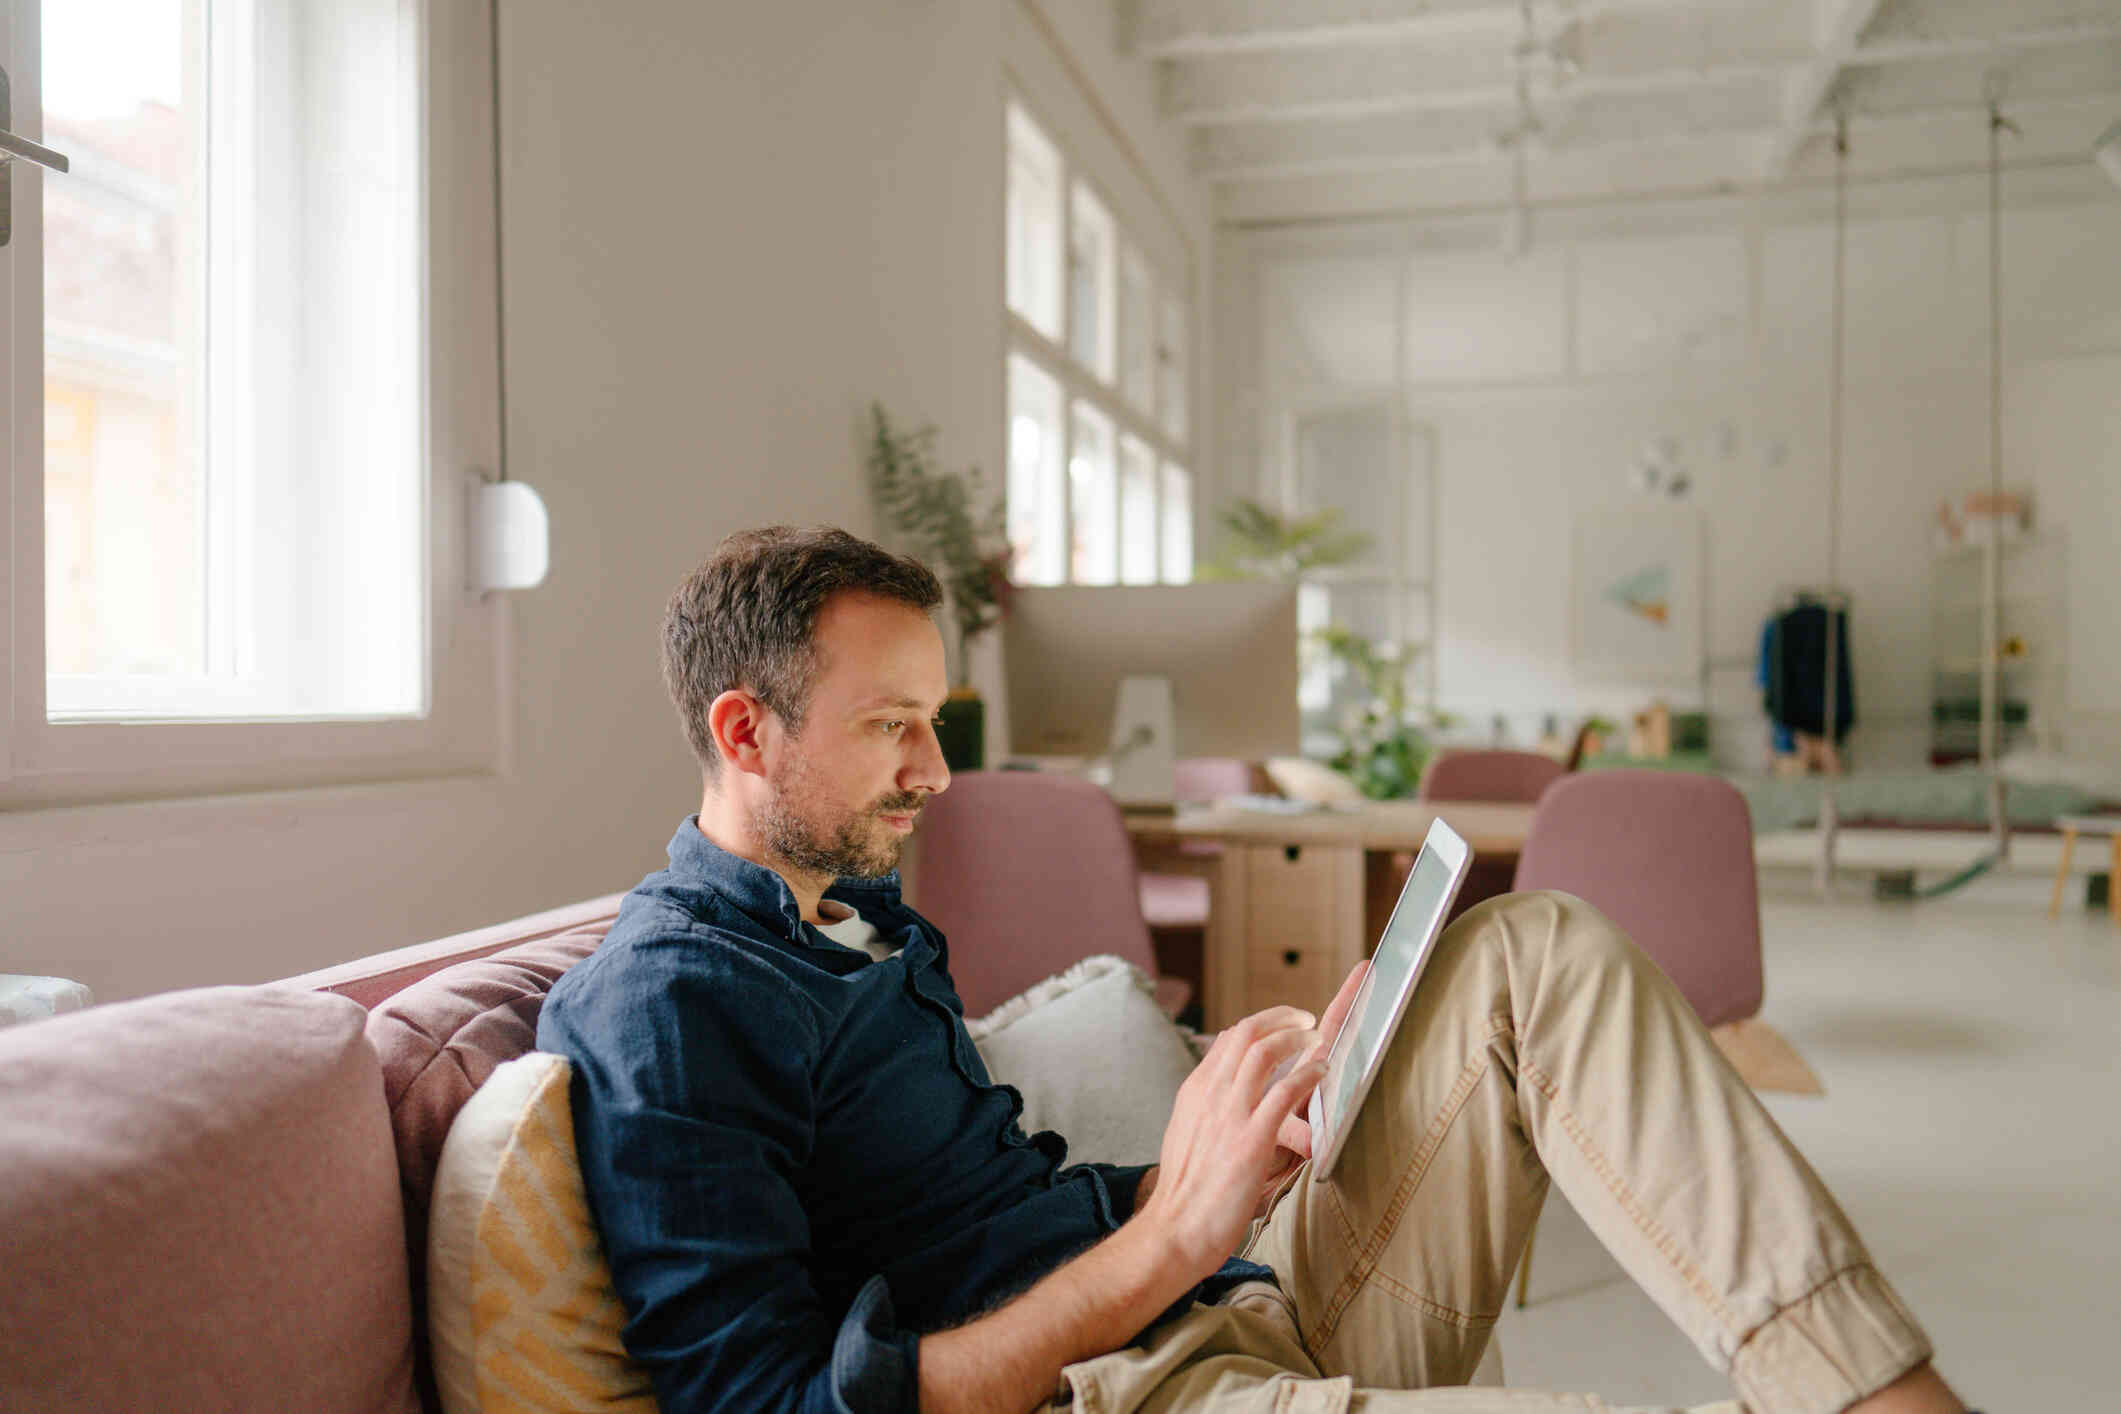 A man in a blue shirt sits casually on the couch and looks at the tablet resting against his leg as he taps on the screen.